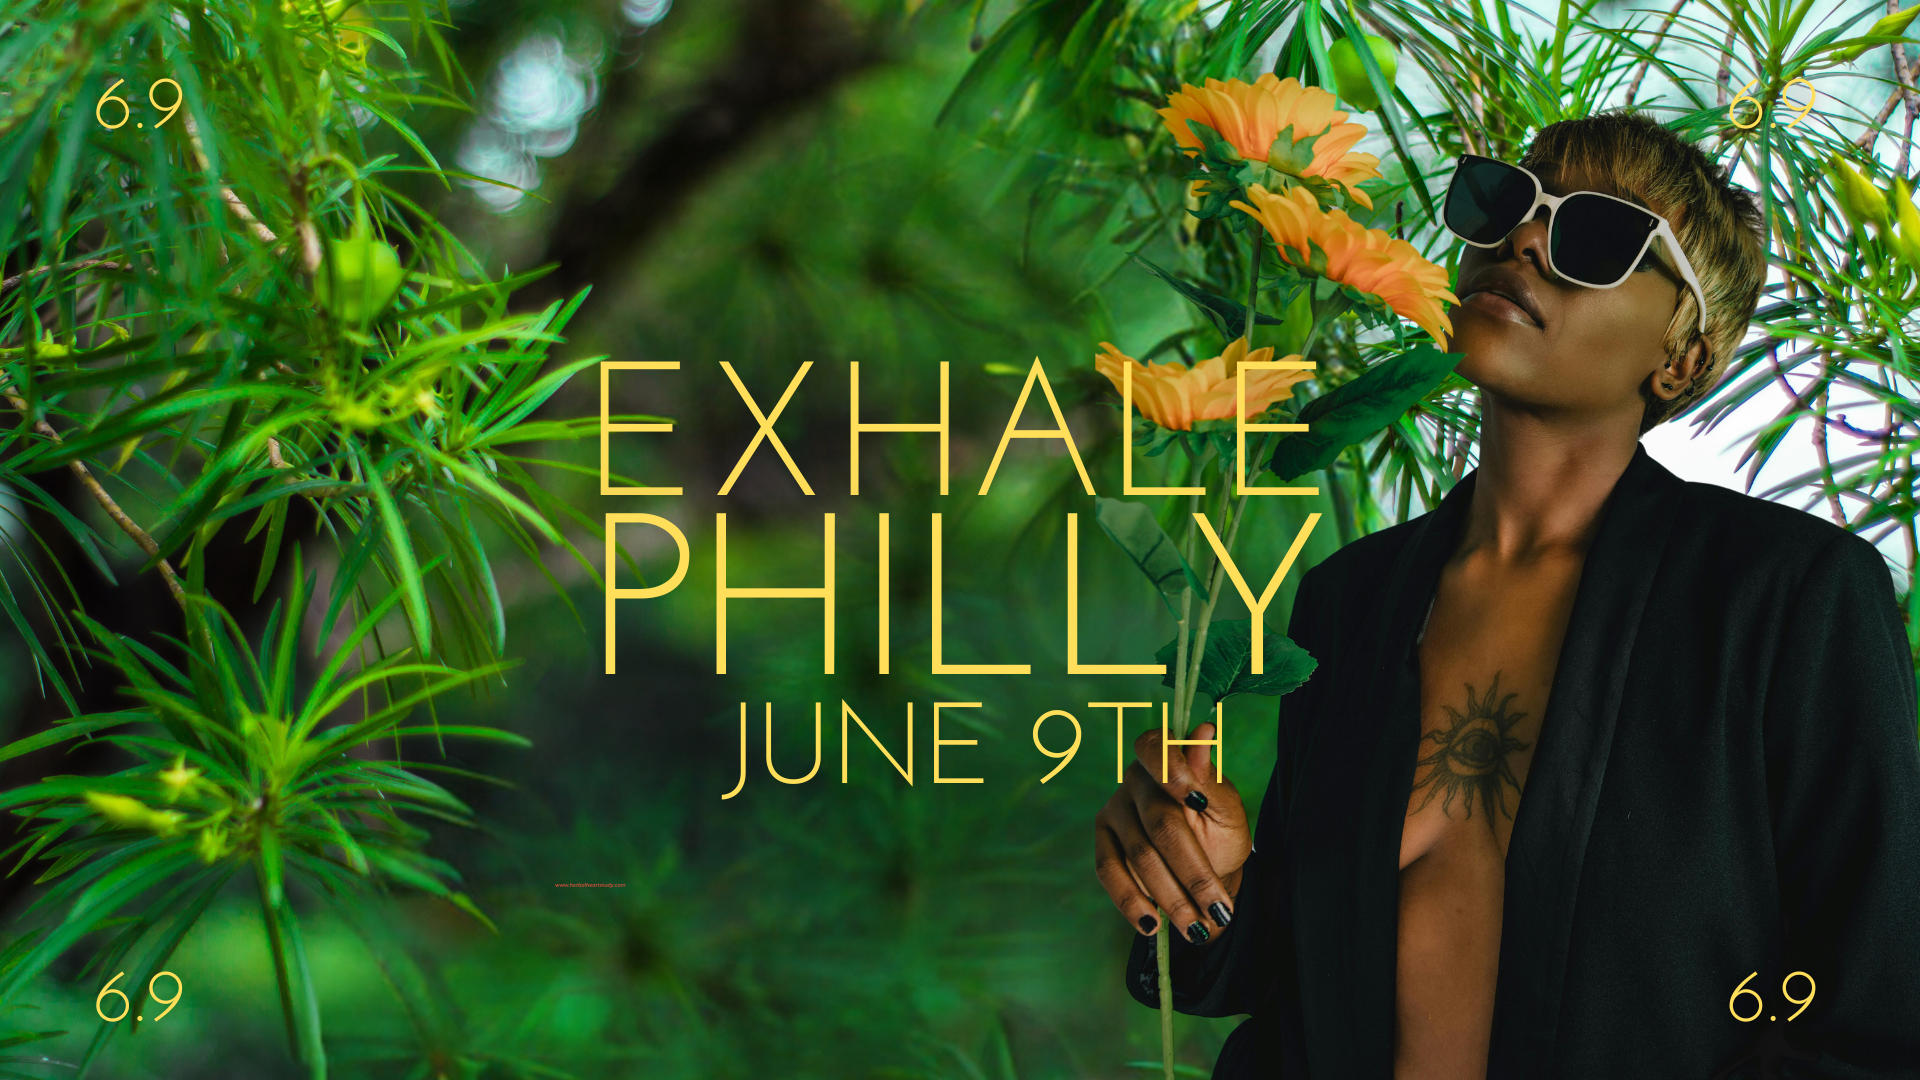 WEST PHILLY CELEBRATES PLANT MEDICINE WITH EXHALE PHILLY JUNE 9TH